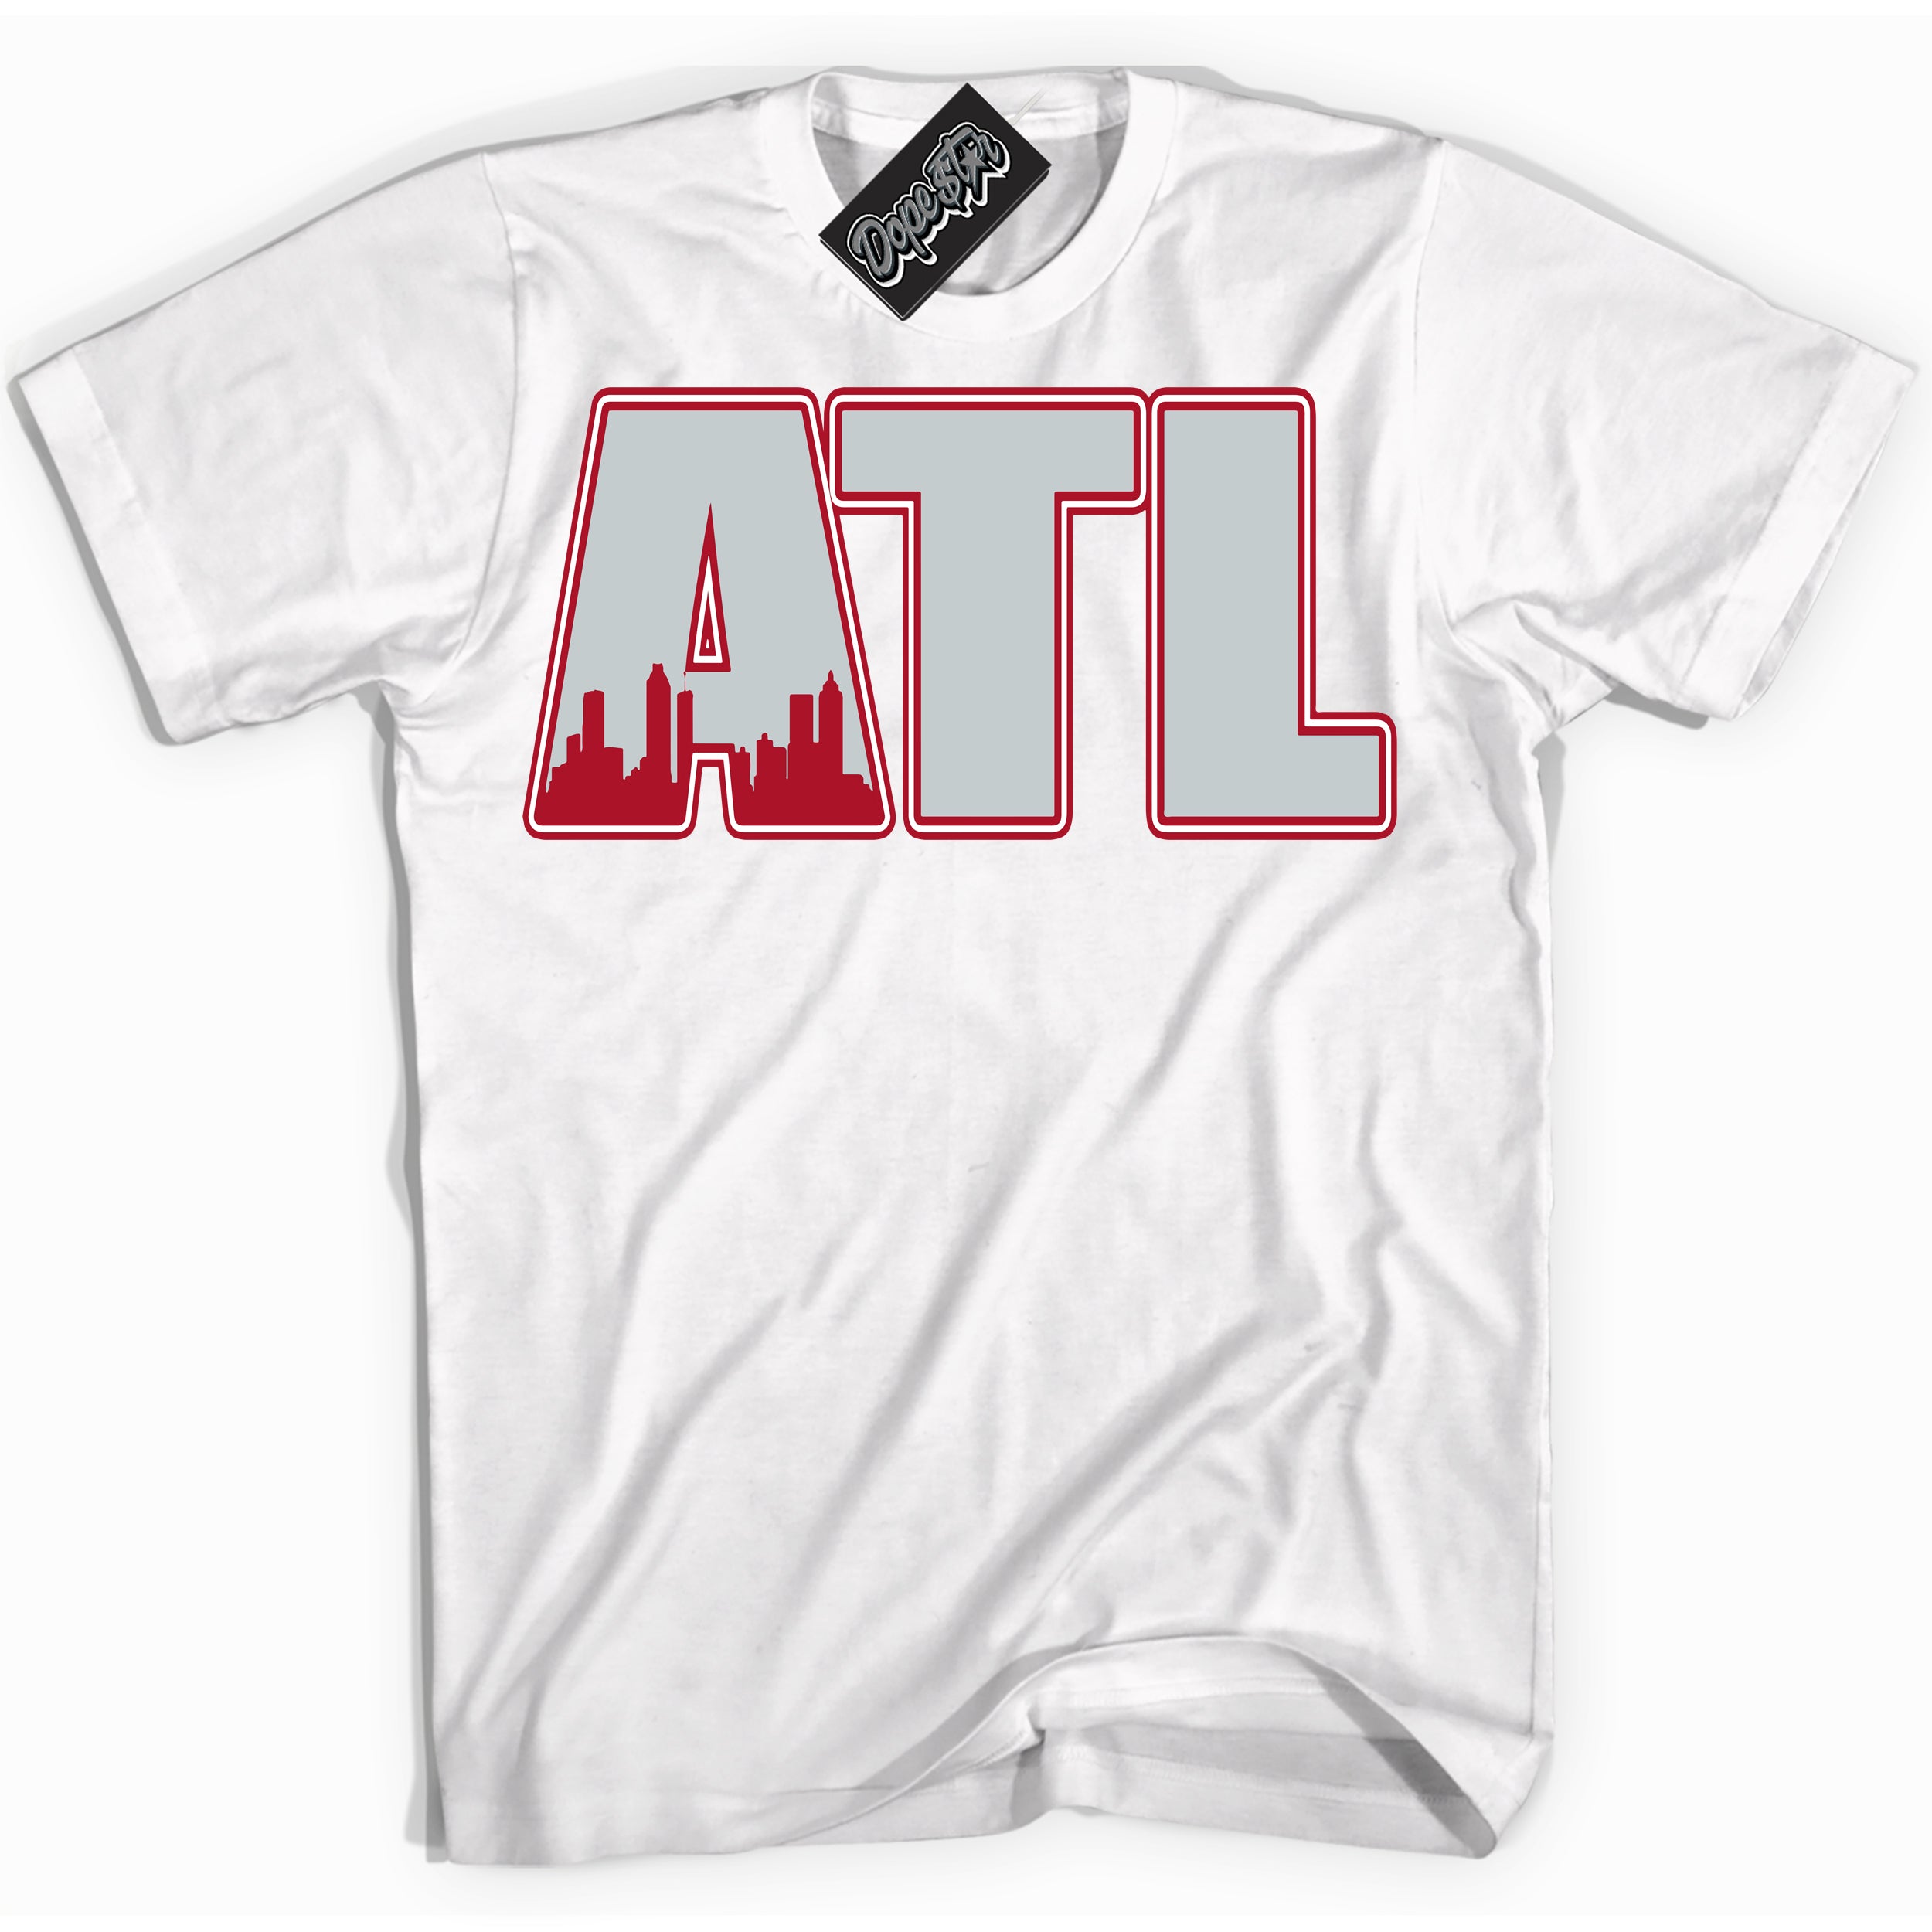 Cool White Shirt with “ Atlanta” design that perfectly matches Reverse Ultraman Sneakers.